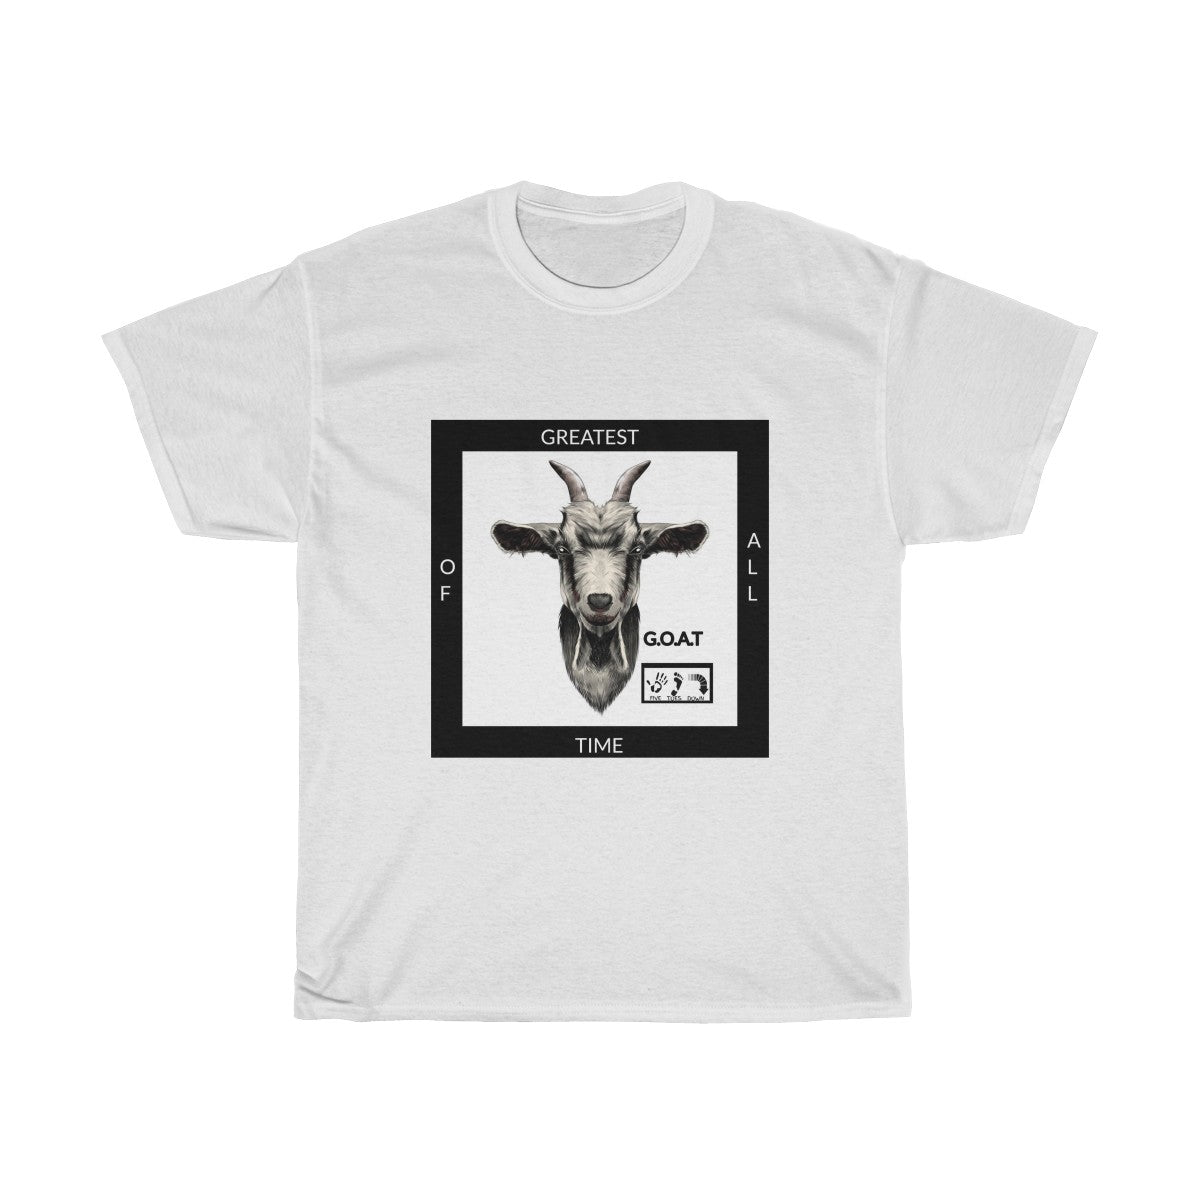 Five Toes Down G.O.A.T Unisex Cotton Tee